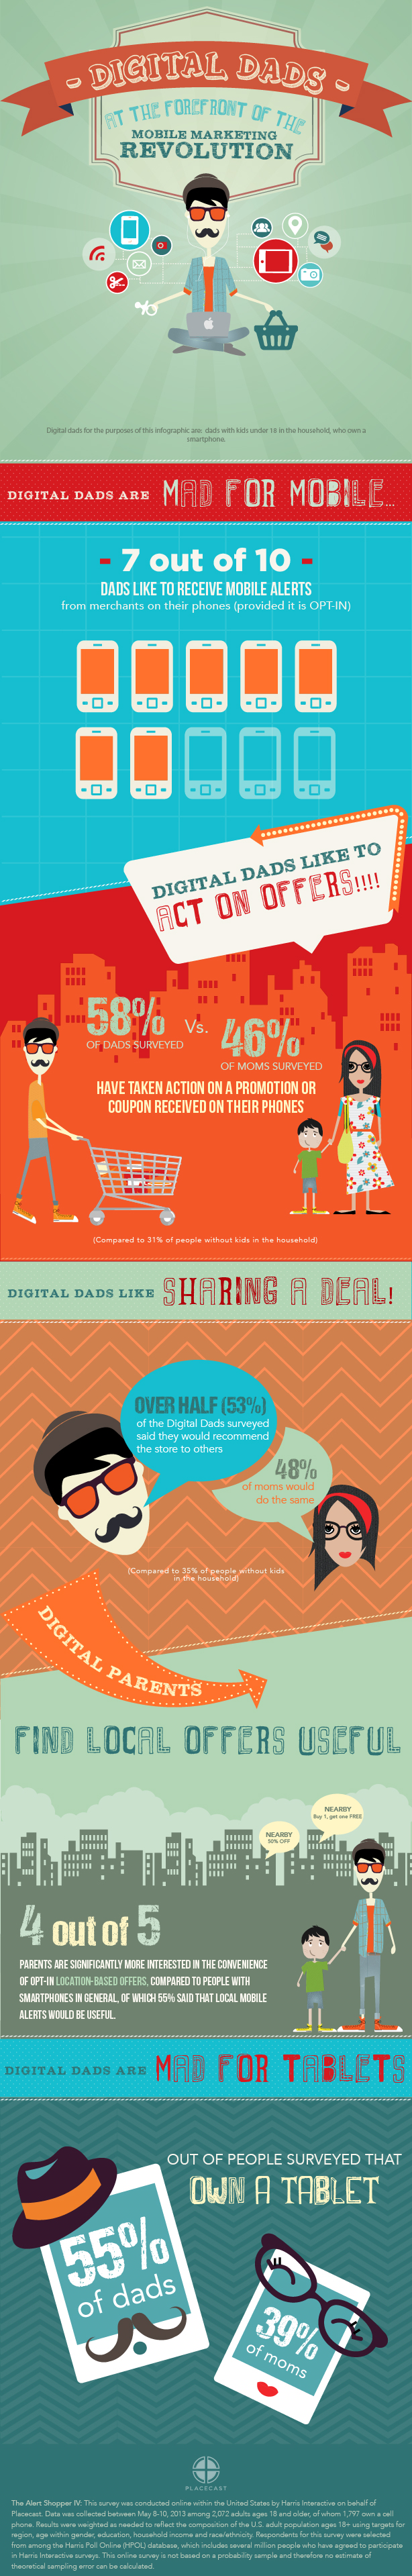 digital-dads-at-the-forefront-of-the-mobile-marketing-revolution